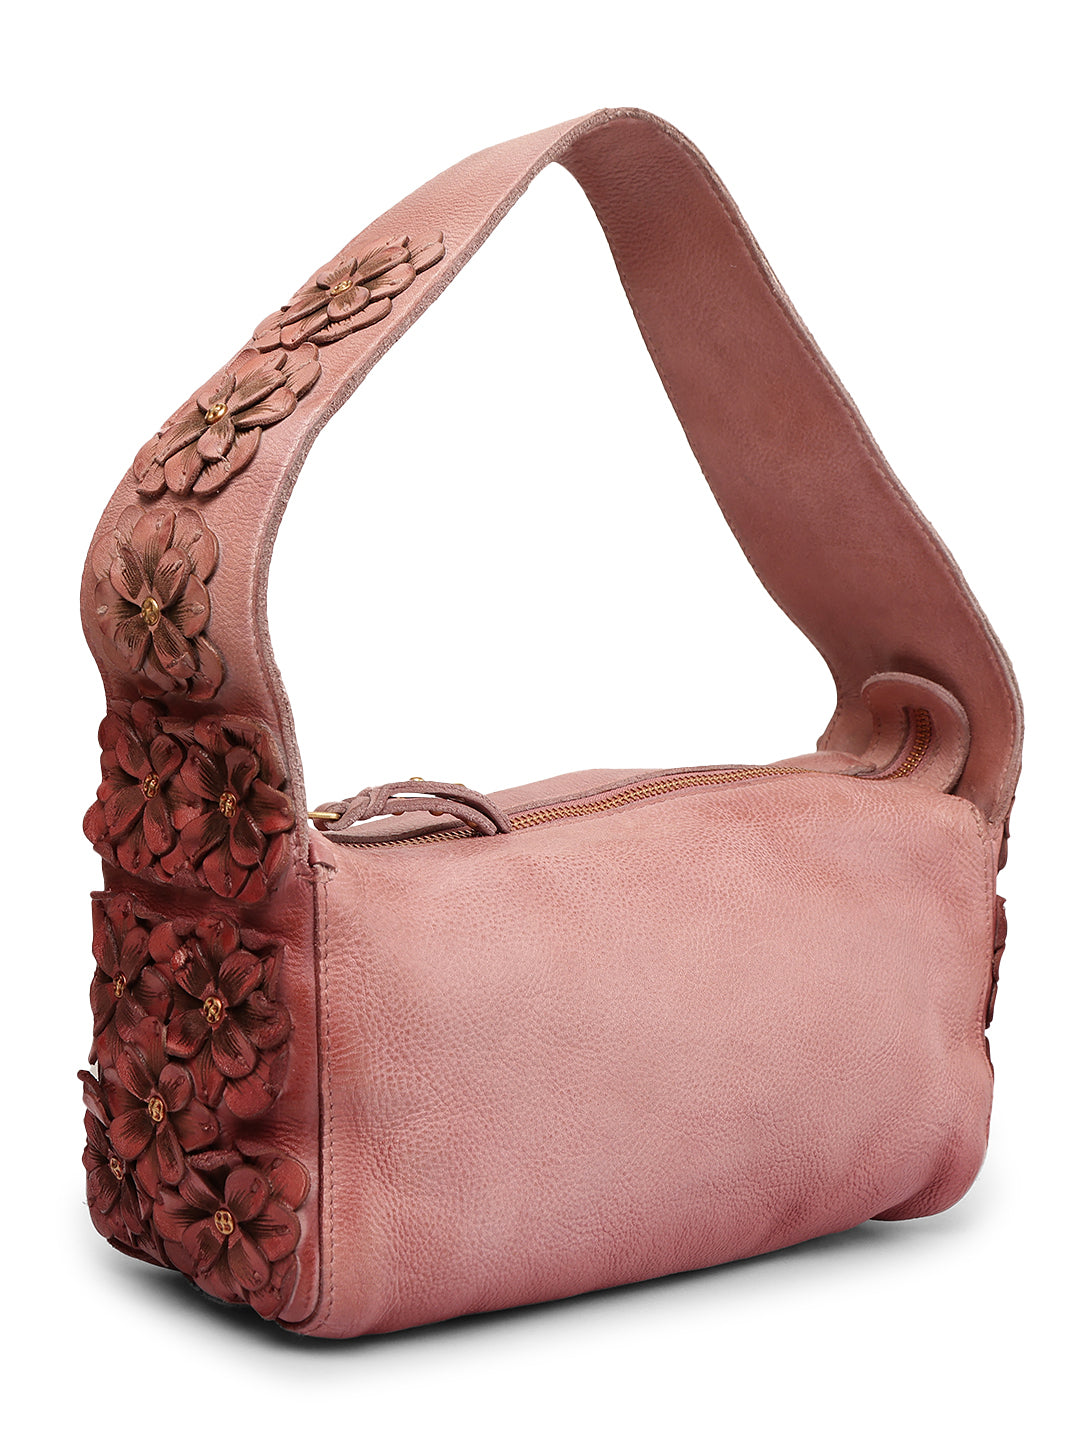 Roseate Charm: Elevate Your Look with Our Leather Shoulder Bag